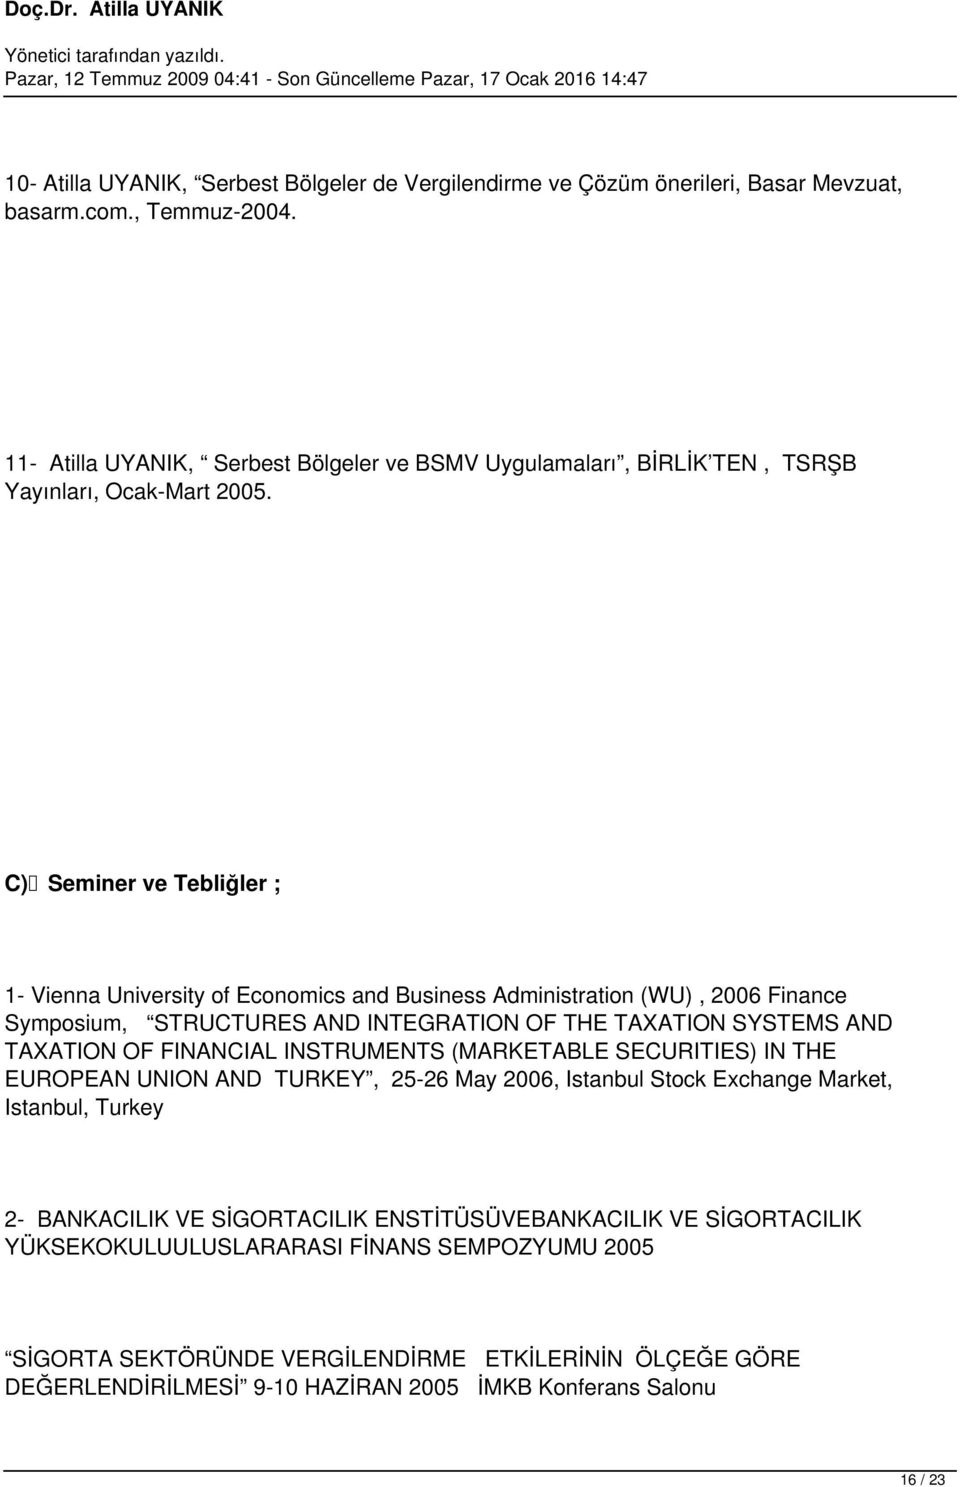 C) Seminer ve Tebliğler ; 1- Vienna University of Economics and Business Administration (WU), 2006 Finance Symposium, STRUCTURES AND INTEGRATION OF THE TAXATION SYSTEMS AND TAXATION OF FINANCIAL